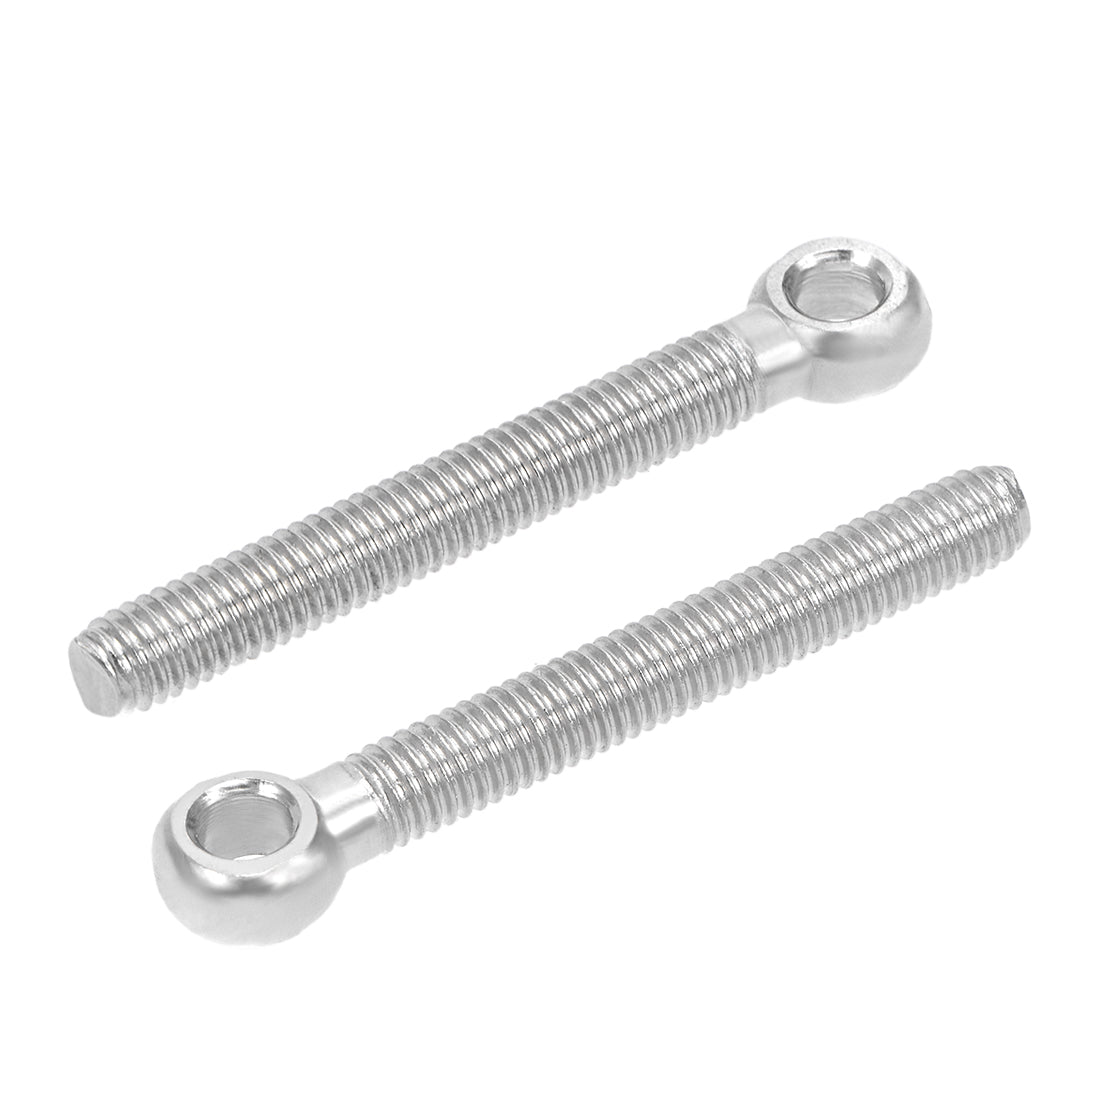 Uxcell Uxcell M5 x 40mm 304 Stainless Steel Machine Shoulder Lift Eye Bolt Rigging 20pcs